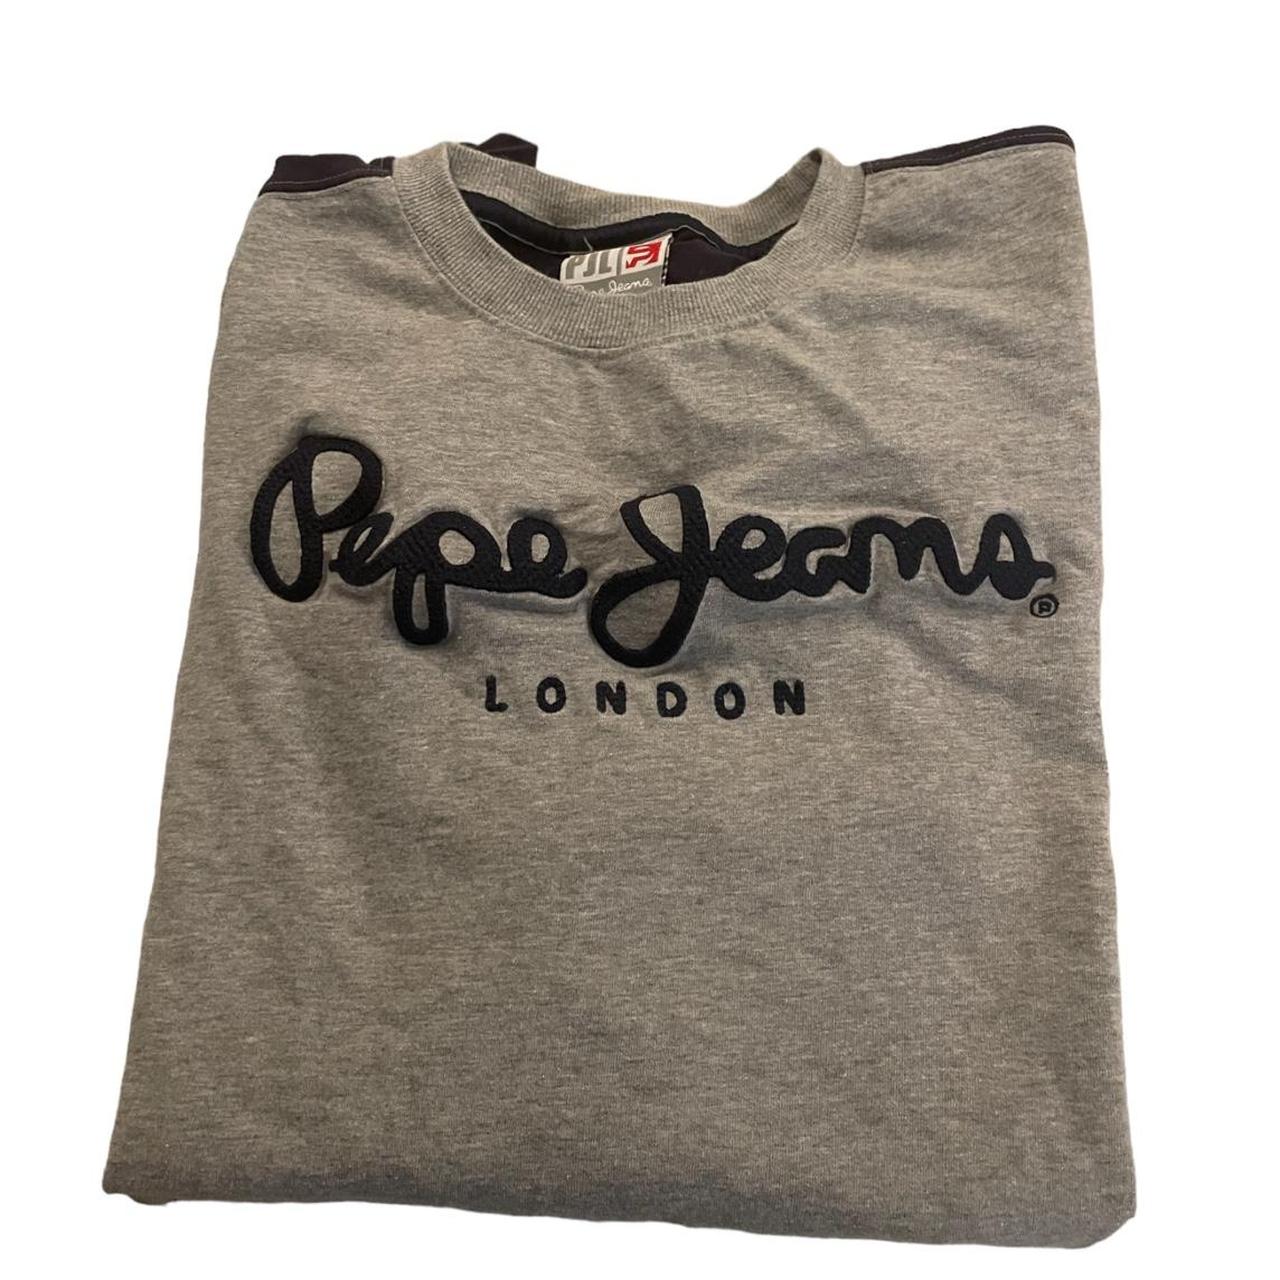 Pepe Jeans Men's Navy and Grey T-shirt (3)